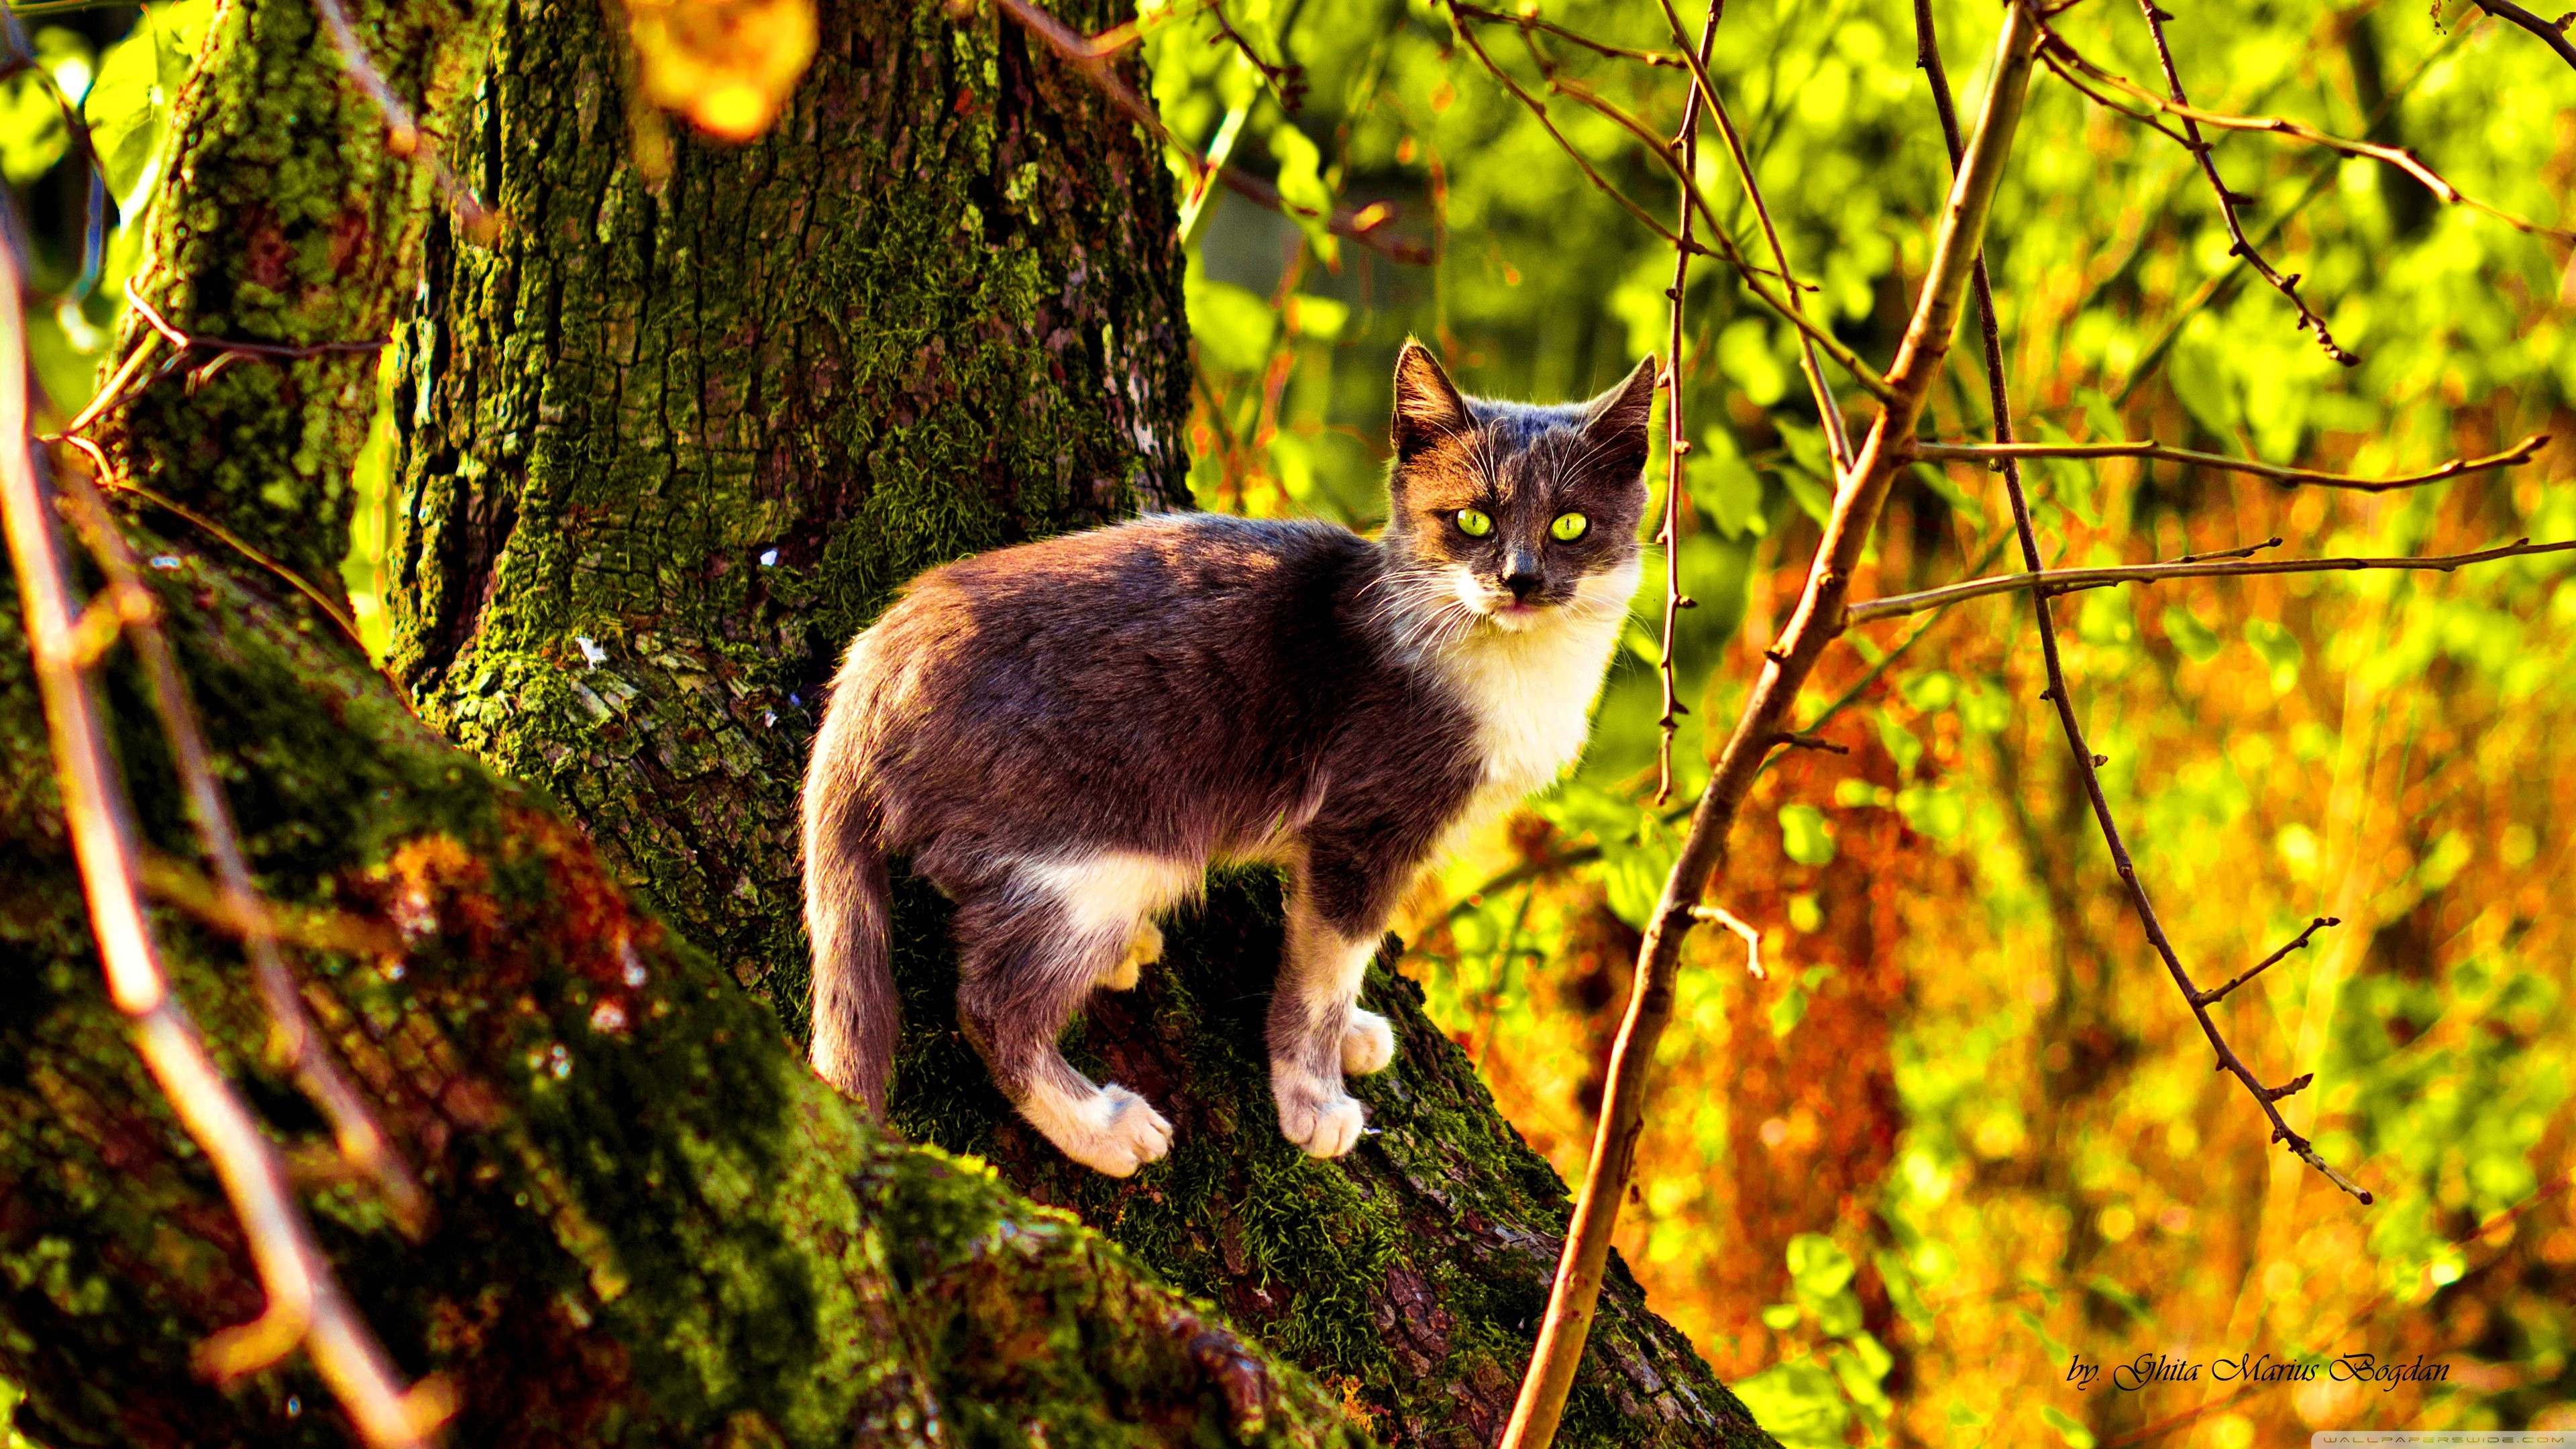 General 3840x2160 nature cats trees twigs animals moss colorful fall mammals animal eyes plants branch outdoors